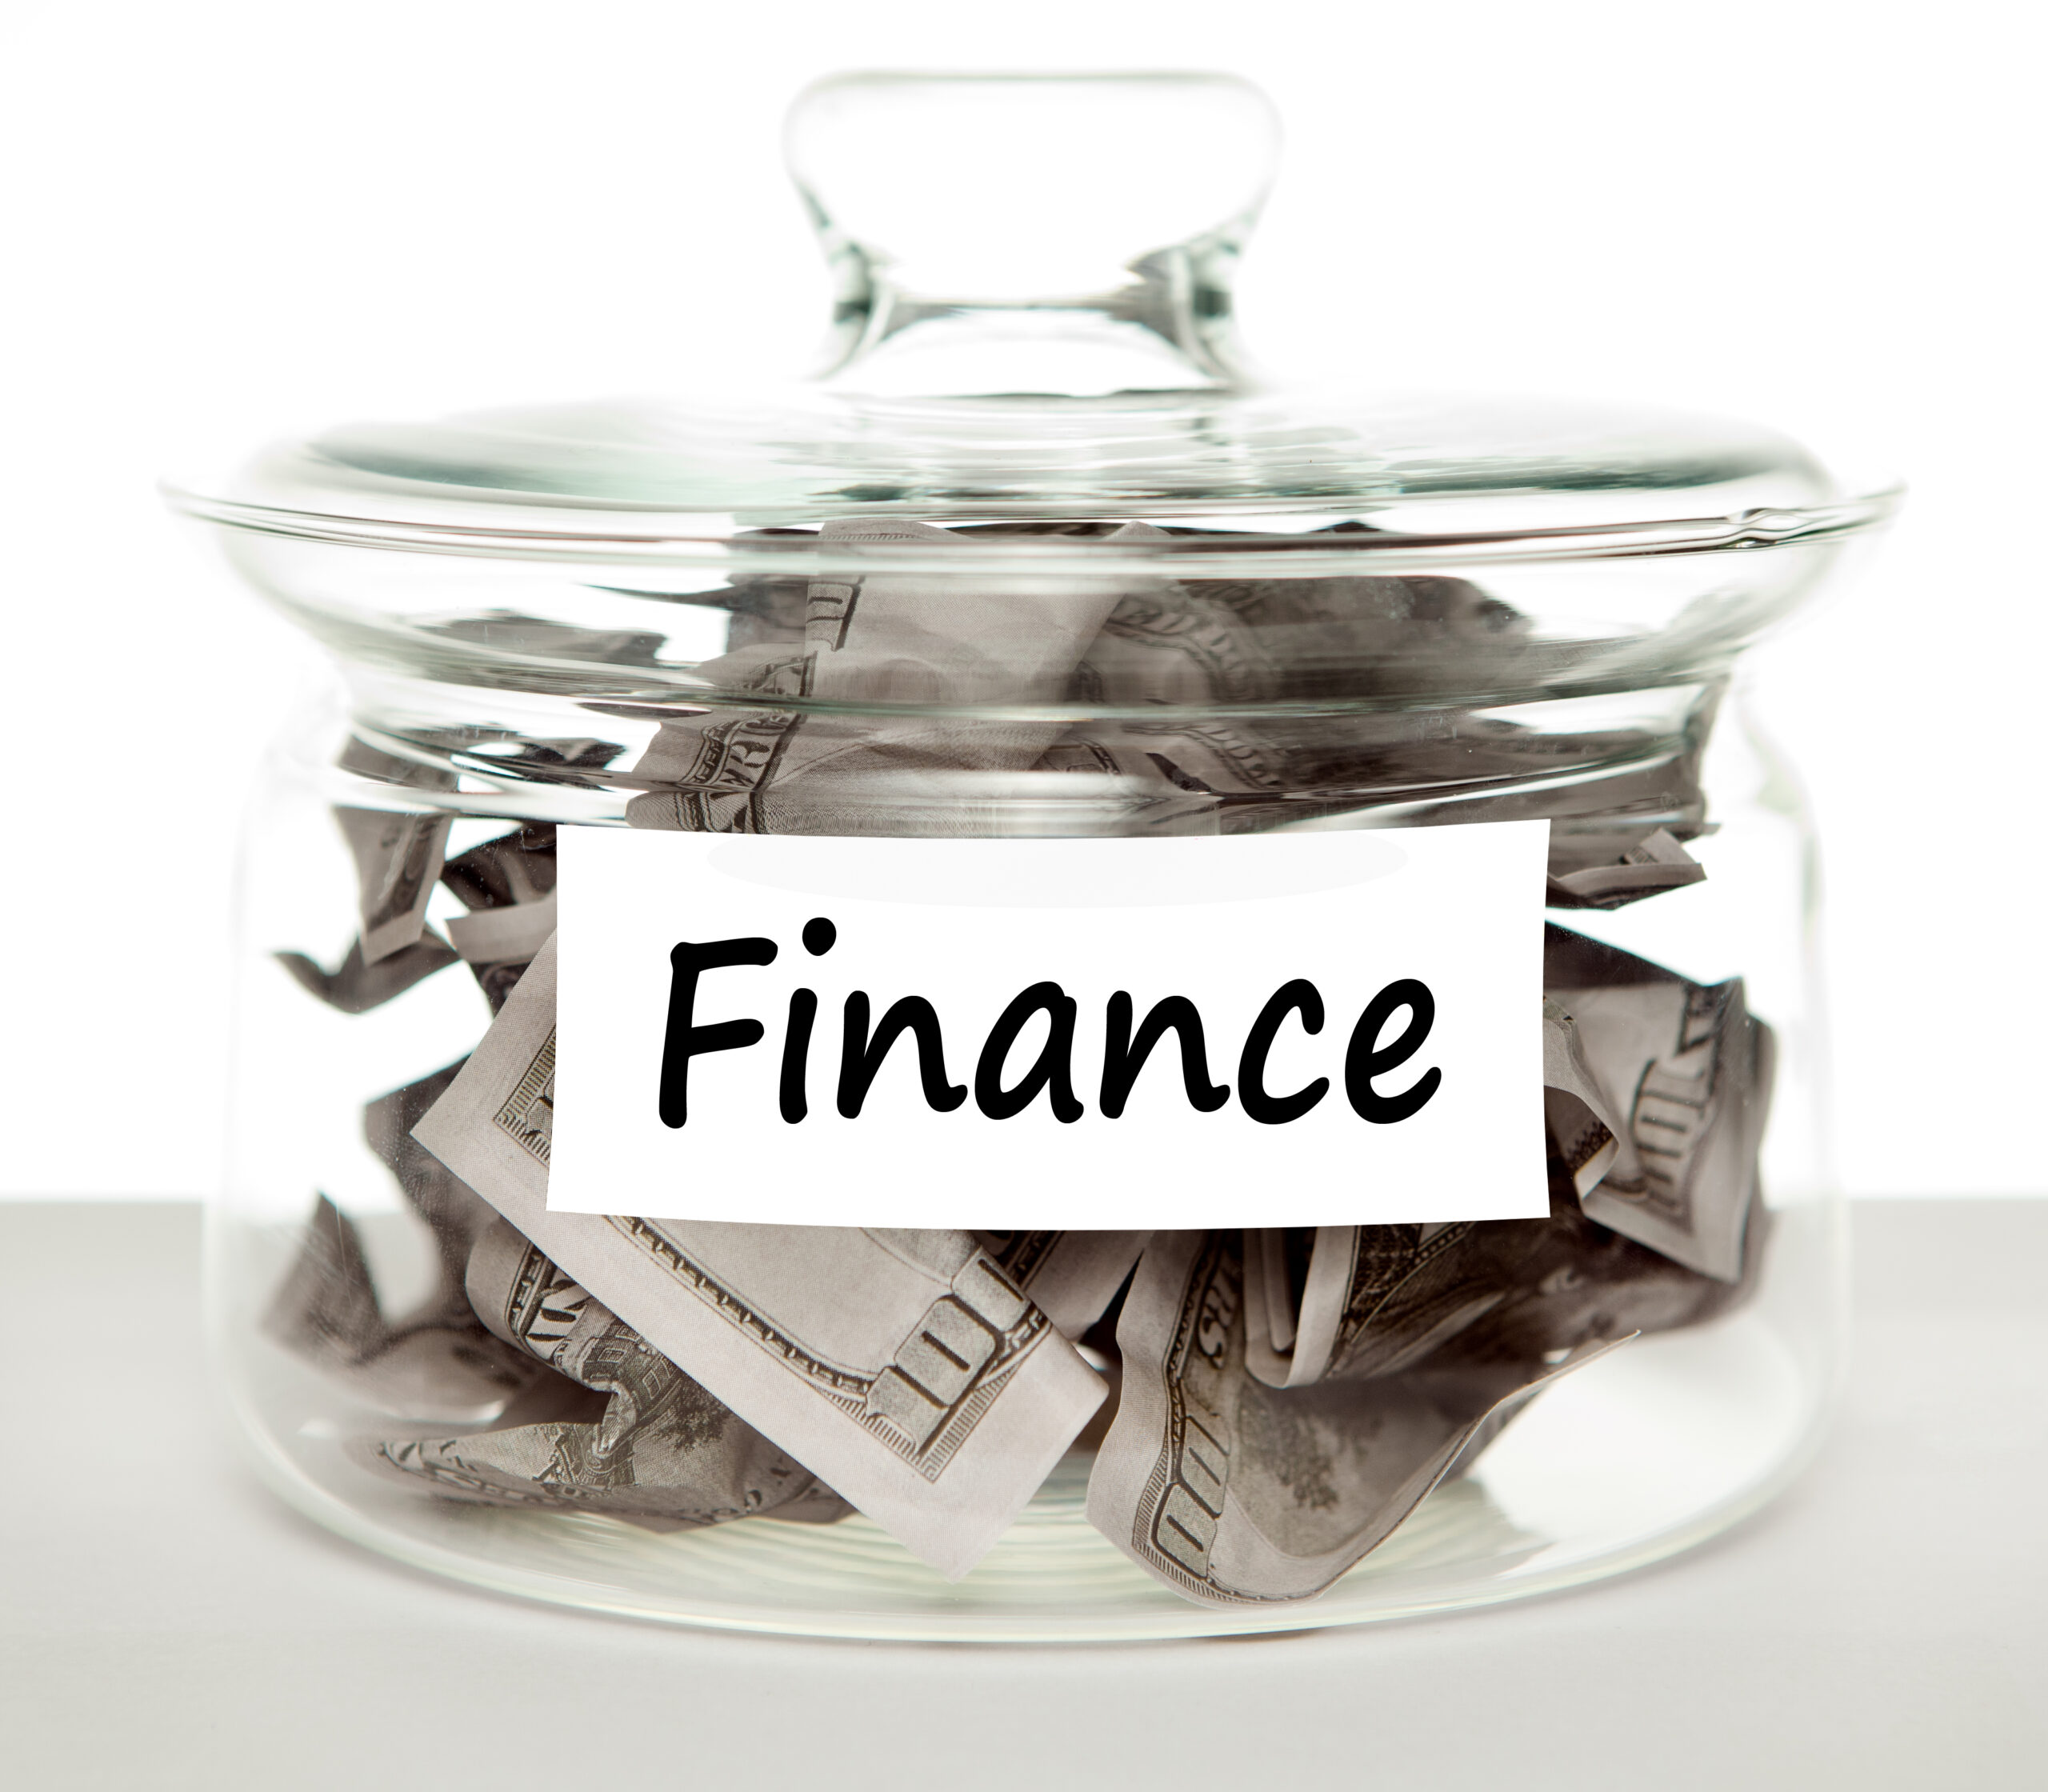 Some Typical Finance Mistakes To Avoid